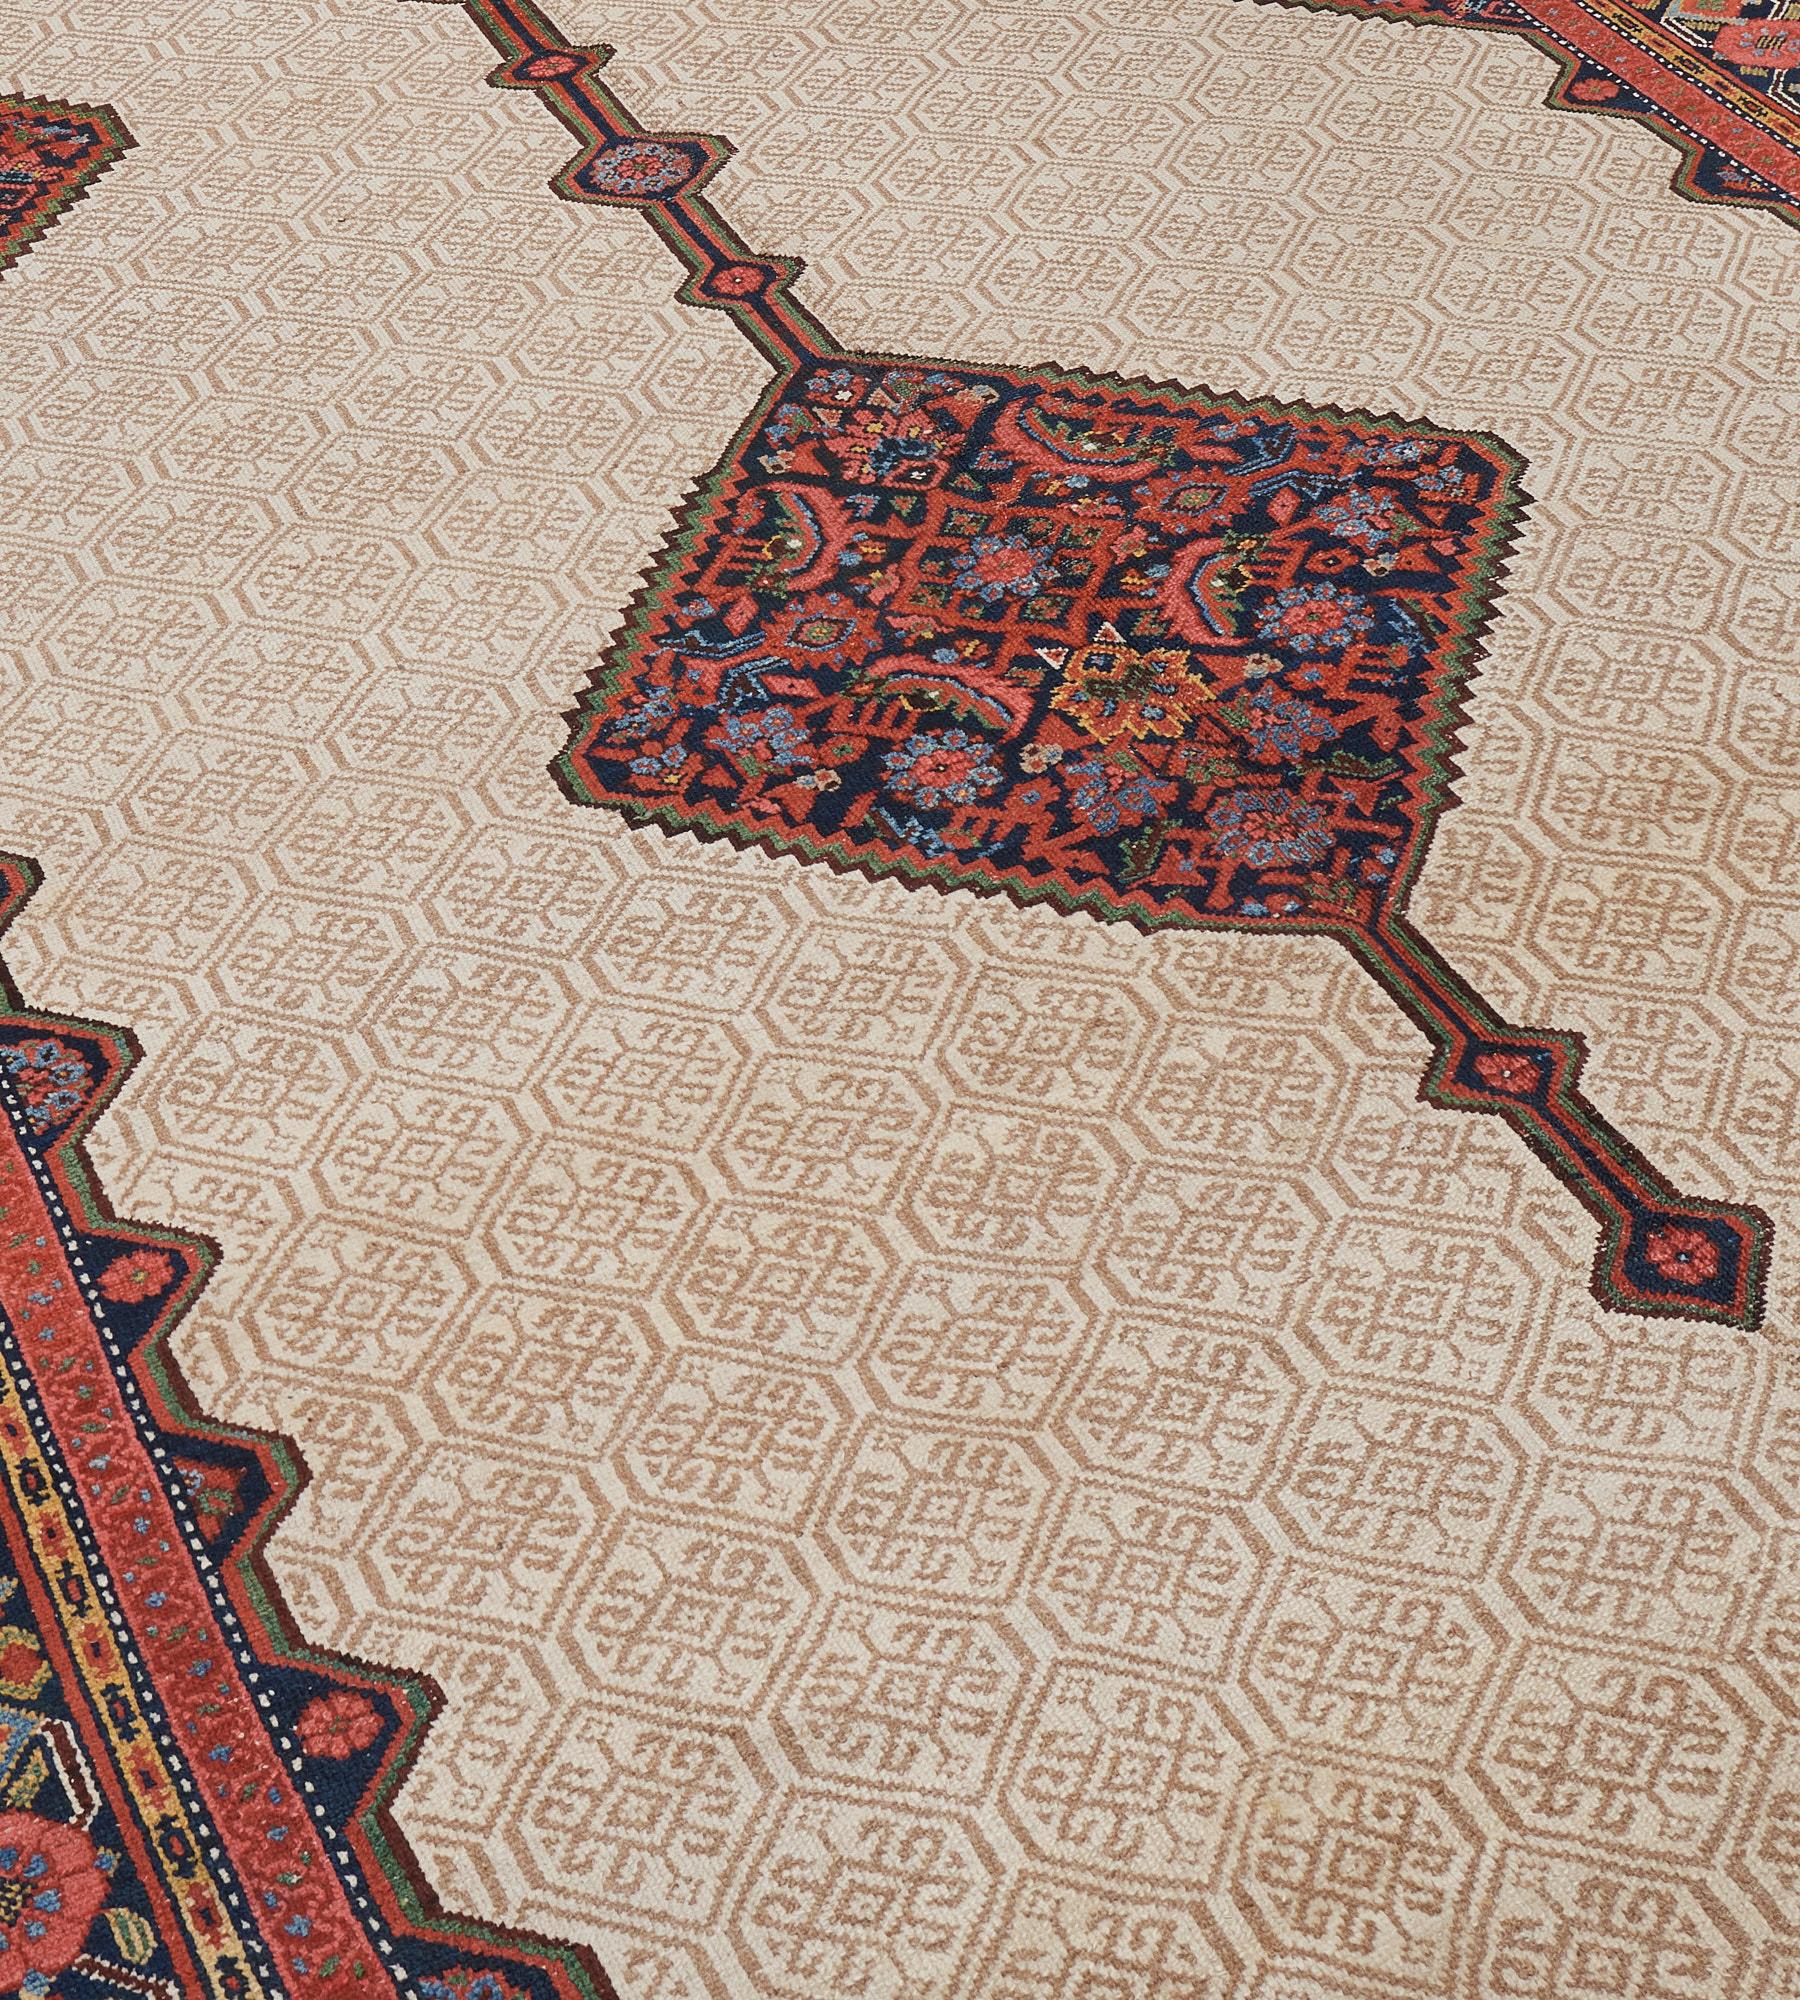 This antique, circa 1900, Persian Serab Runner has an ivory field with a soft buff-brown honeycomb design containing a central hooked floral motif around a central column of linked indigo-blue serrated lozenges containing a polychrome